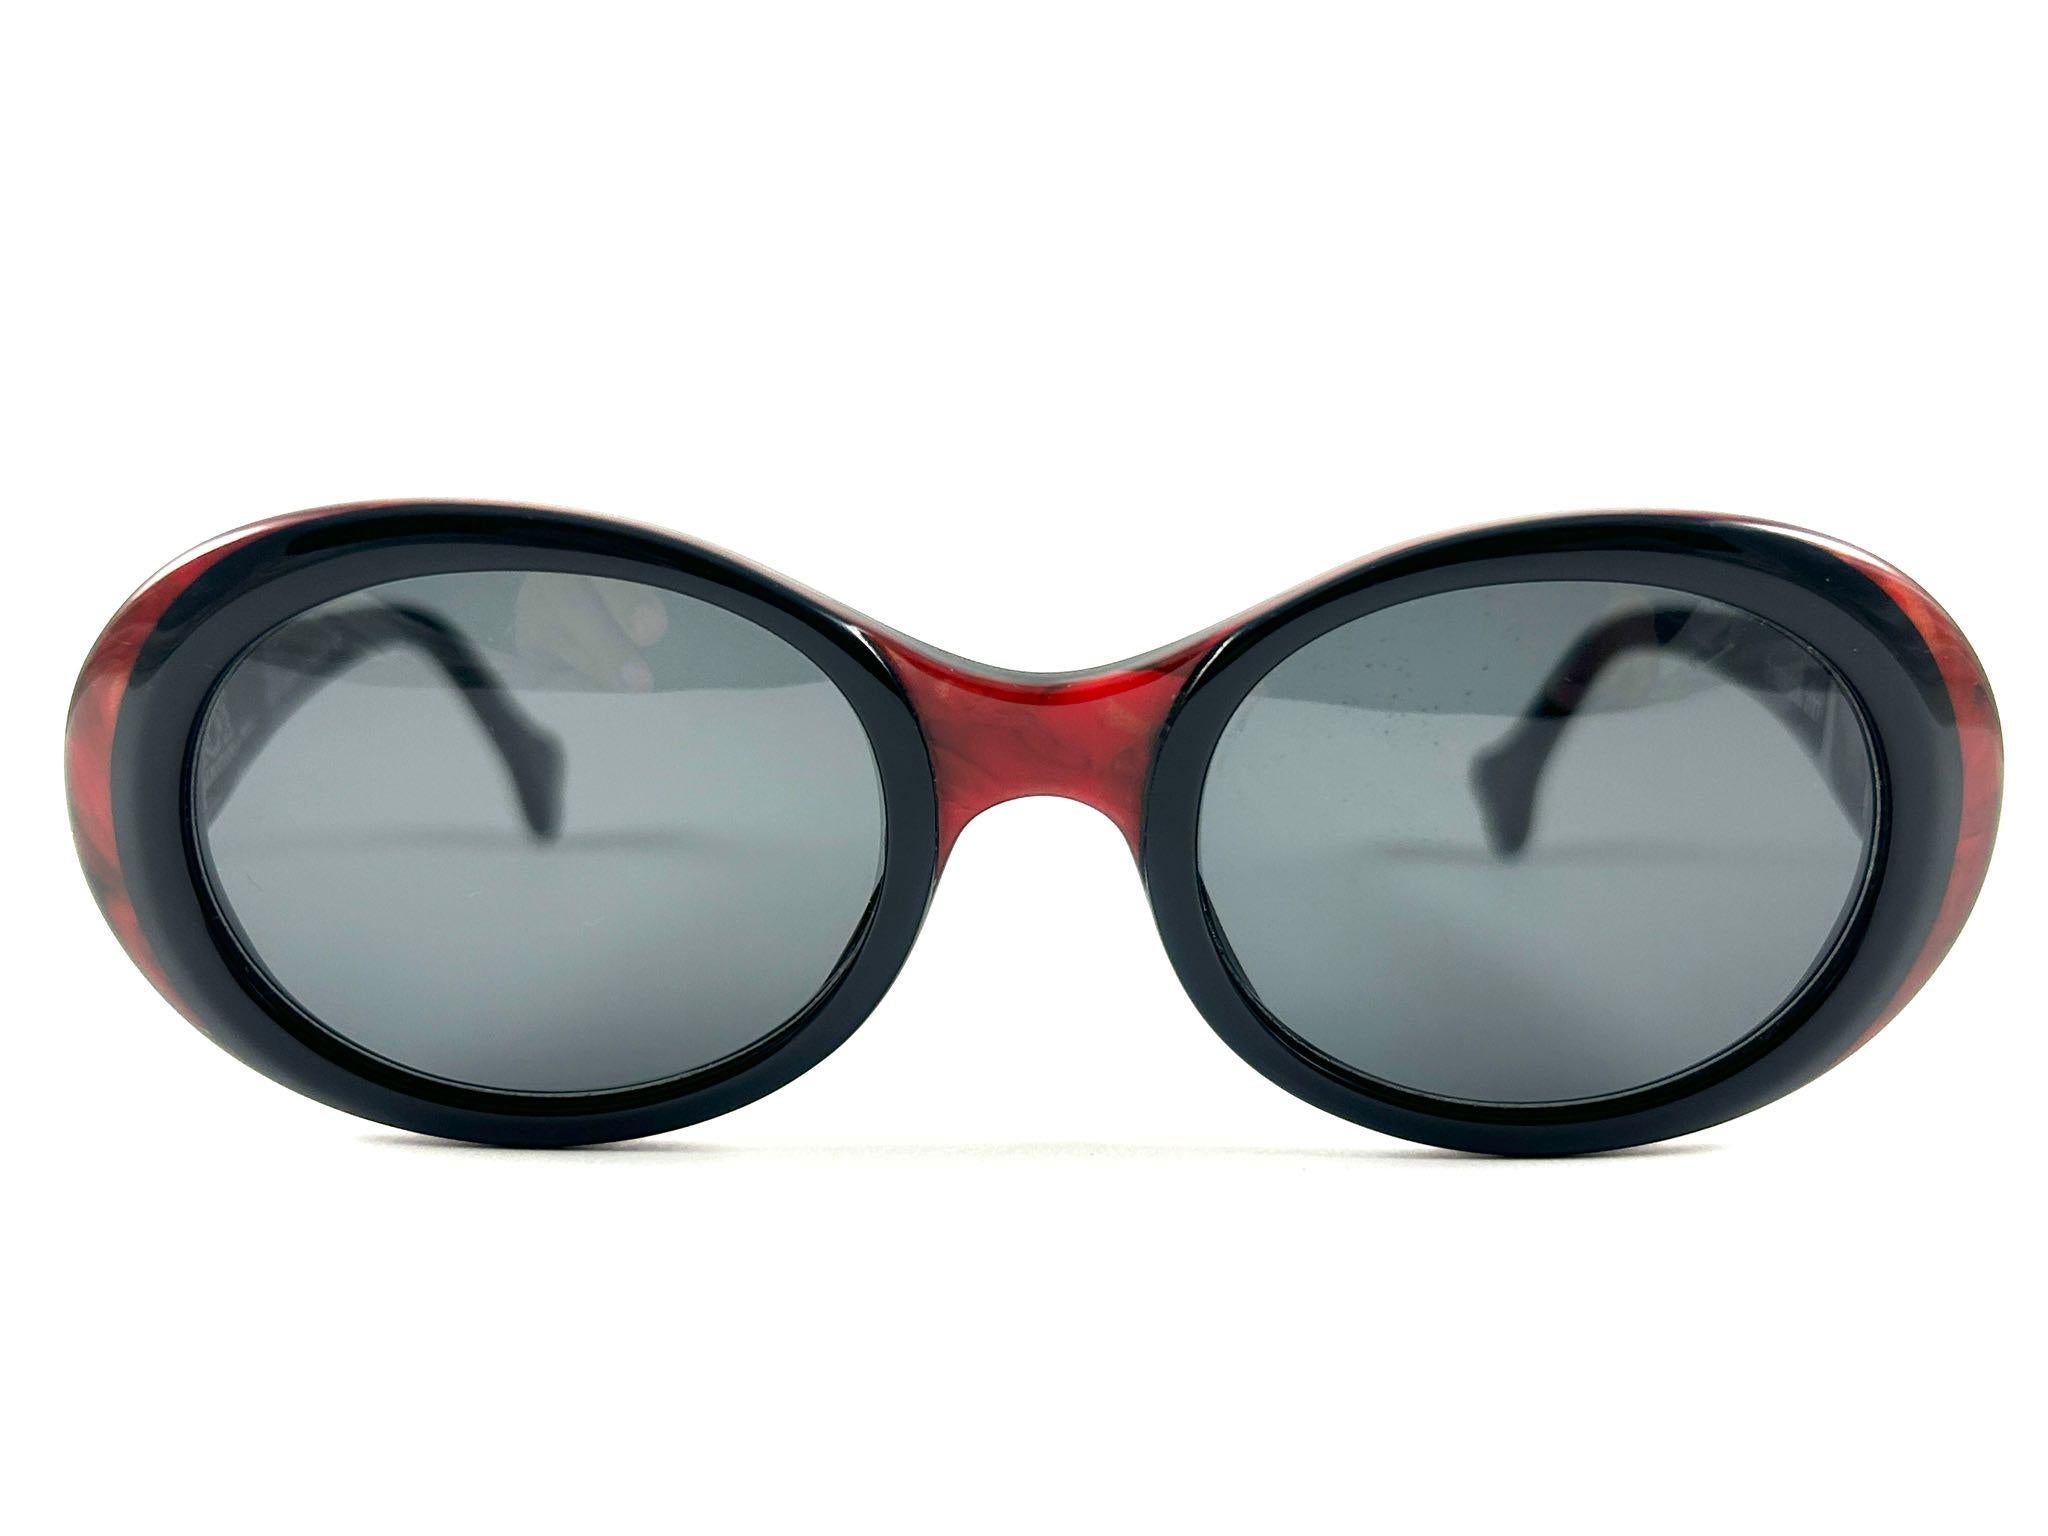 New Vintage Alain Mikli for 101 Dalmatians D303 France Sunglasses 1980's In New Condition For Sale In Baleares, Baleares